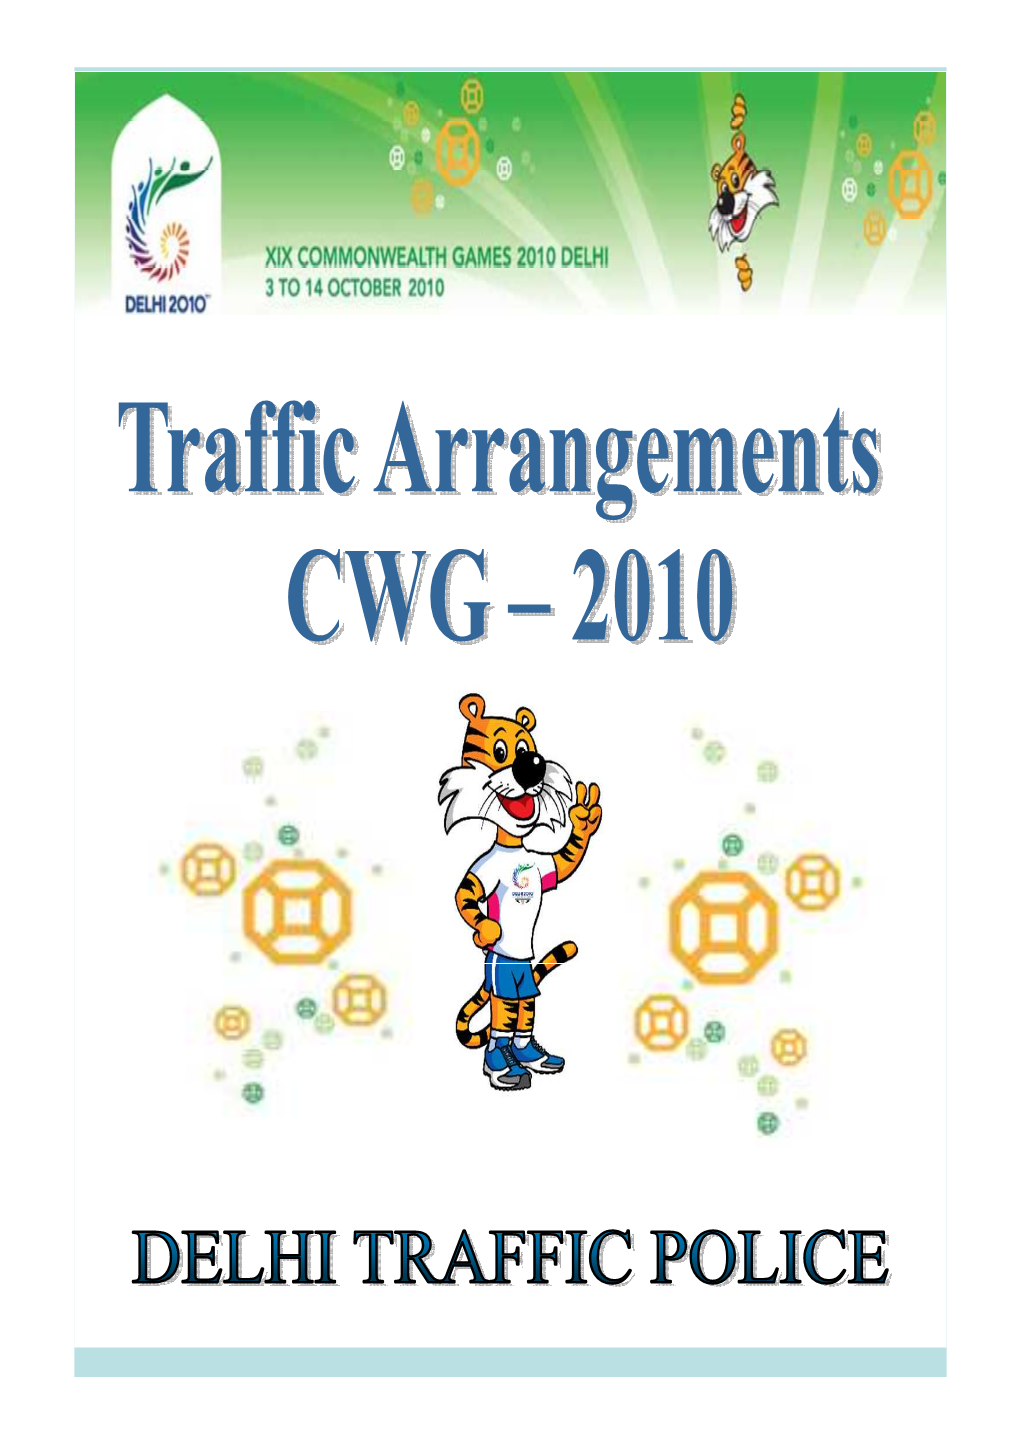 Management of CWG Lanes  CWG Lanes Will Have a Distinct Identity by Marking the Roads with a Distinct Colour and Games Logo